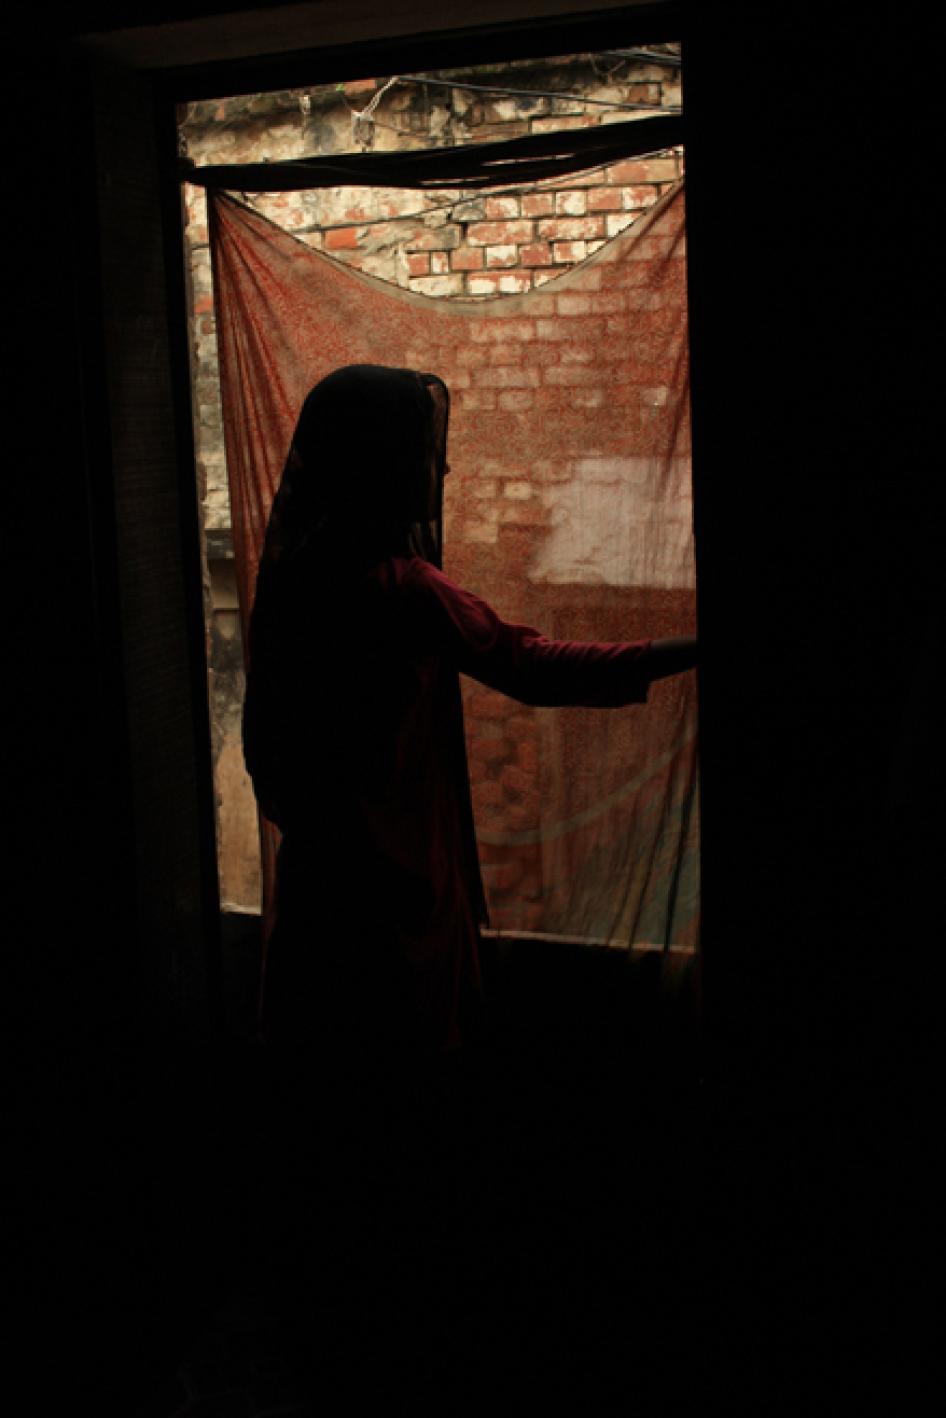 India: Child Sex Abuse Shielded by Silence and Neglect | Human Rights Watch